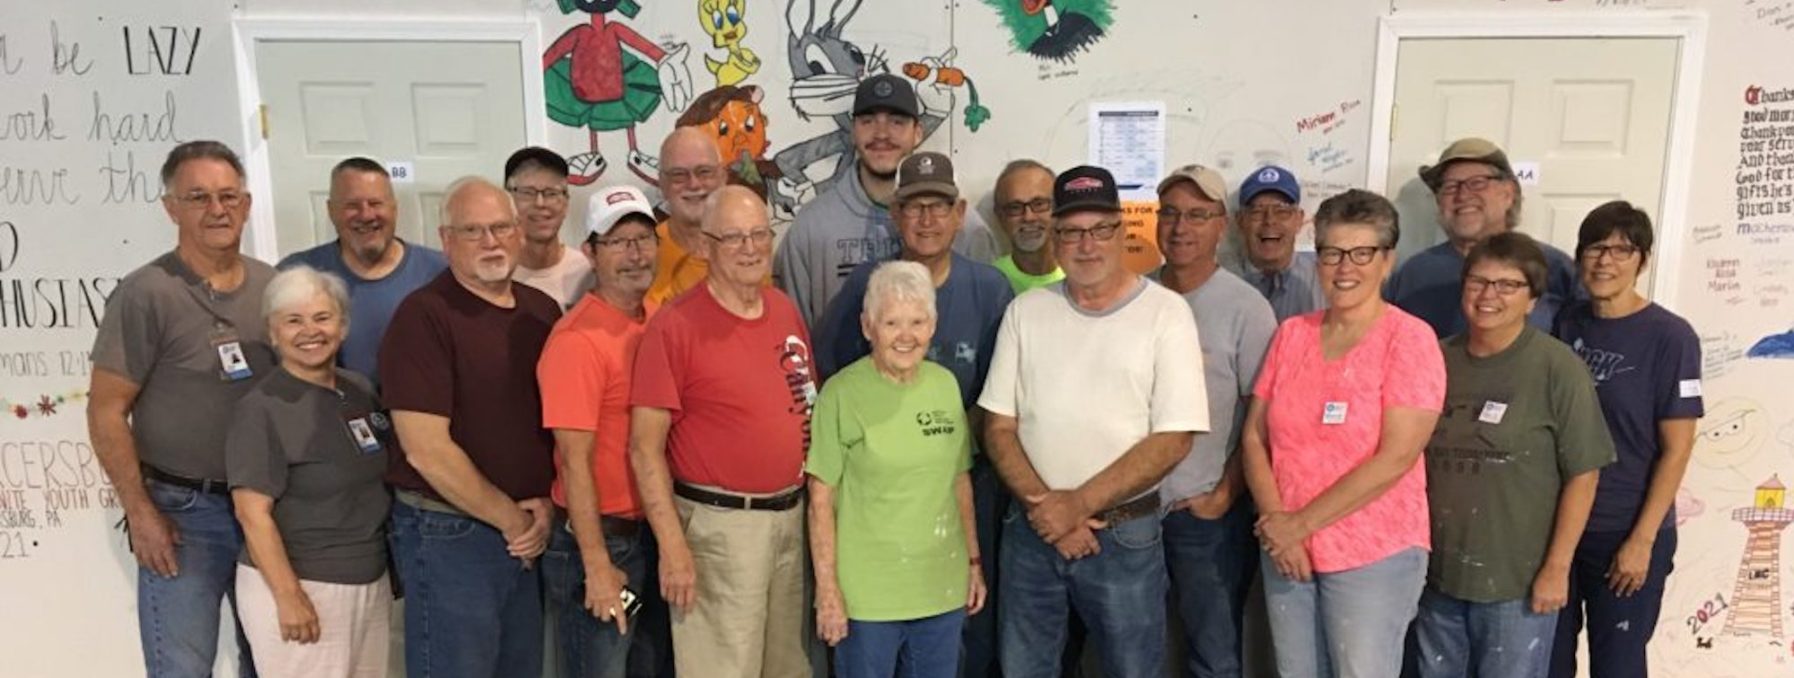 Sara Frey Poses in a green shirt among other volunteers in Jennings, LA